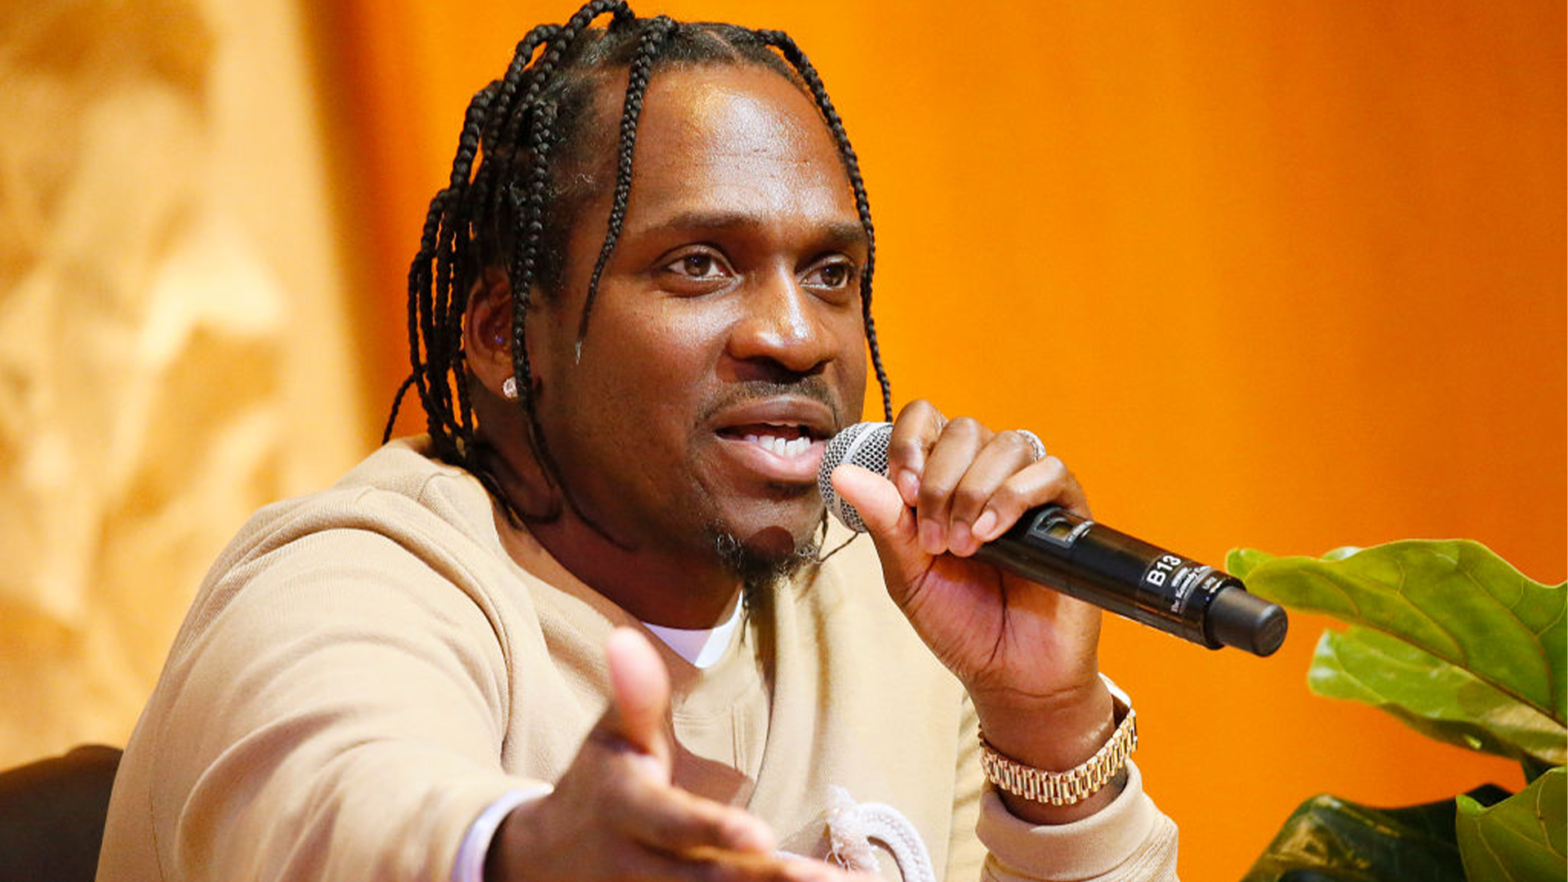 'It Wasn’t The Best Business For Me' — Pusha T Partners With Arby's Again And Takes Ownership After Learning His Lesson With McDonald's